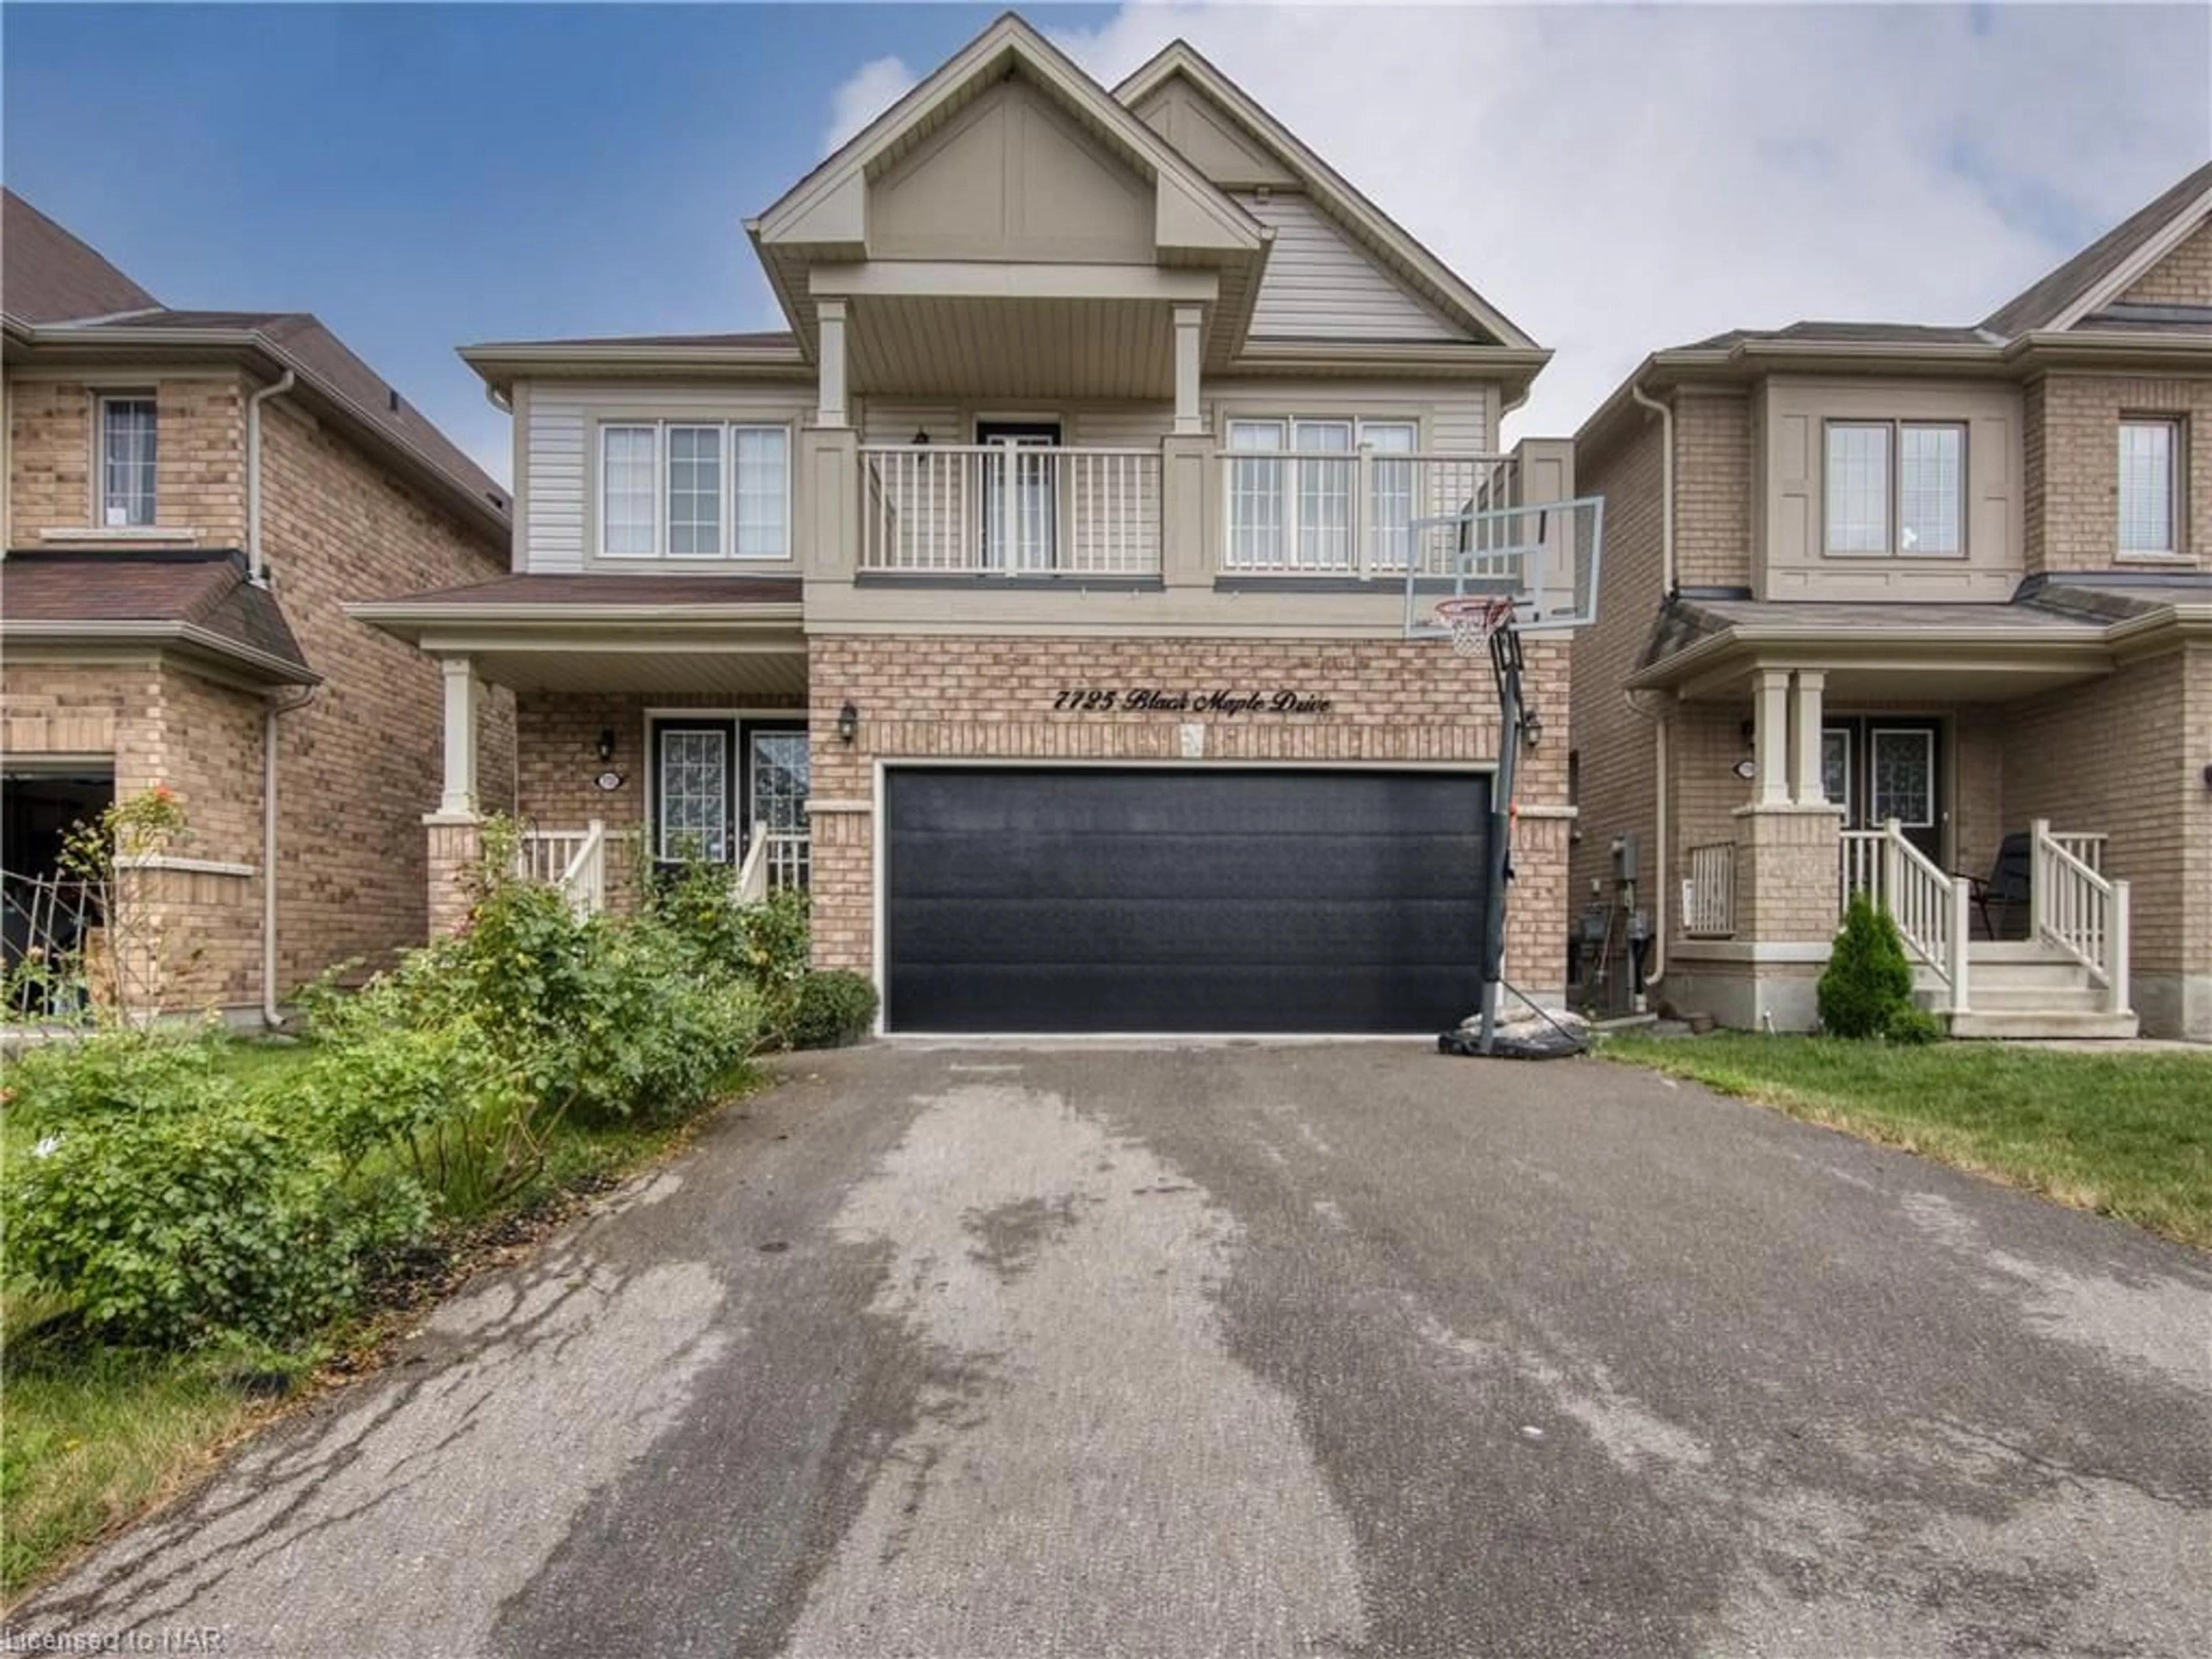 Frontside or backside of a home for 7725 Black Maple Dr, Niagara Falls Ontario L2H 0N7